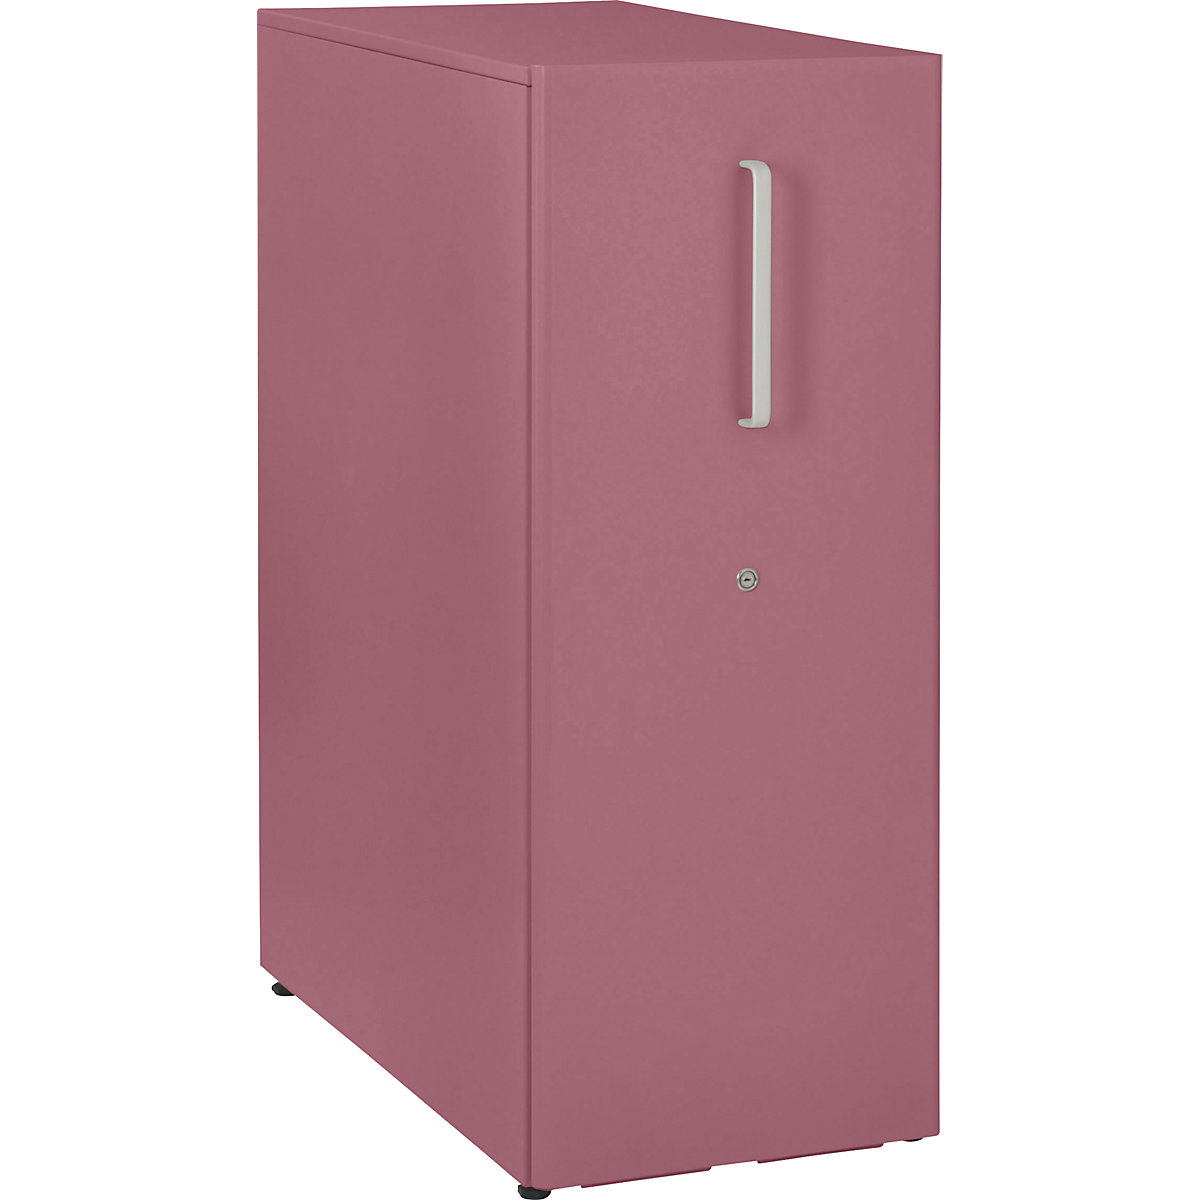 Tower™ 3 add-on furniture, with worktop – BISLEY, for the left side, 3 shelves, pink-17